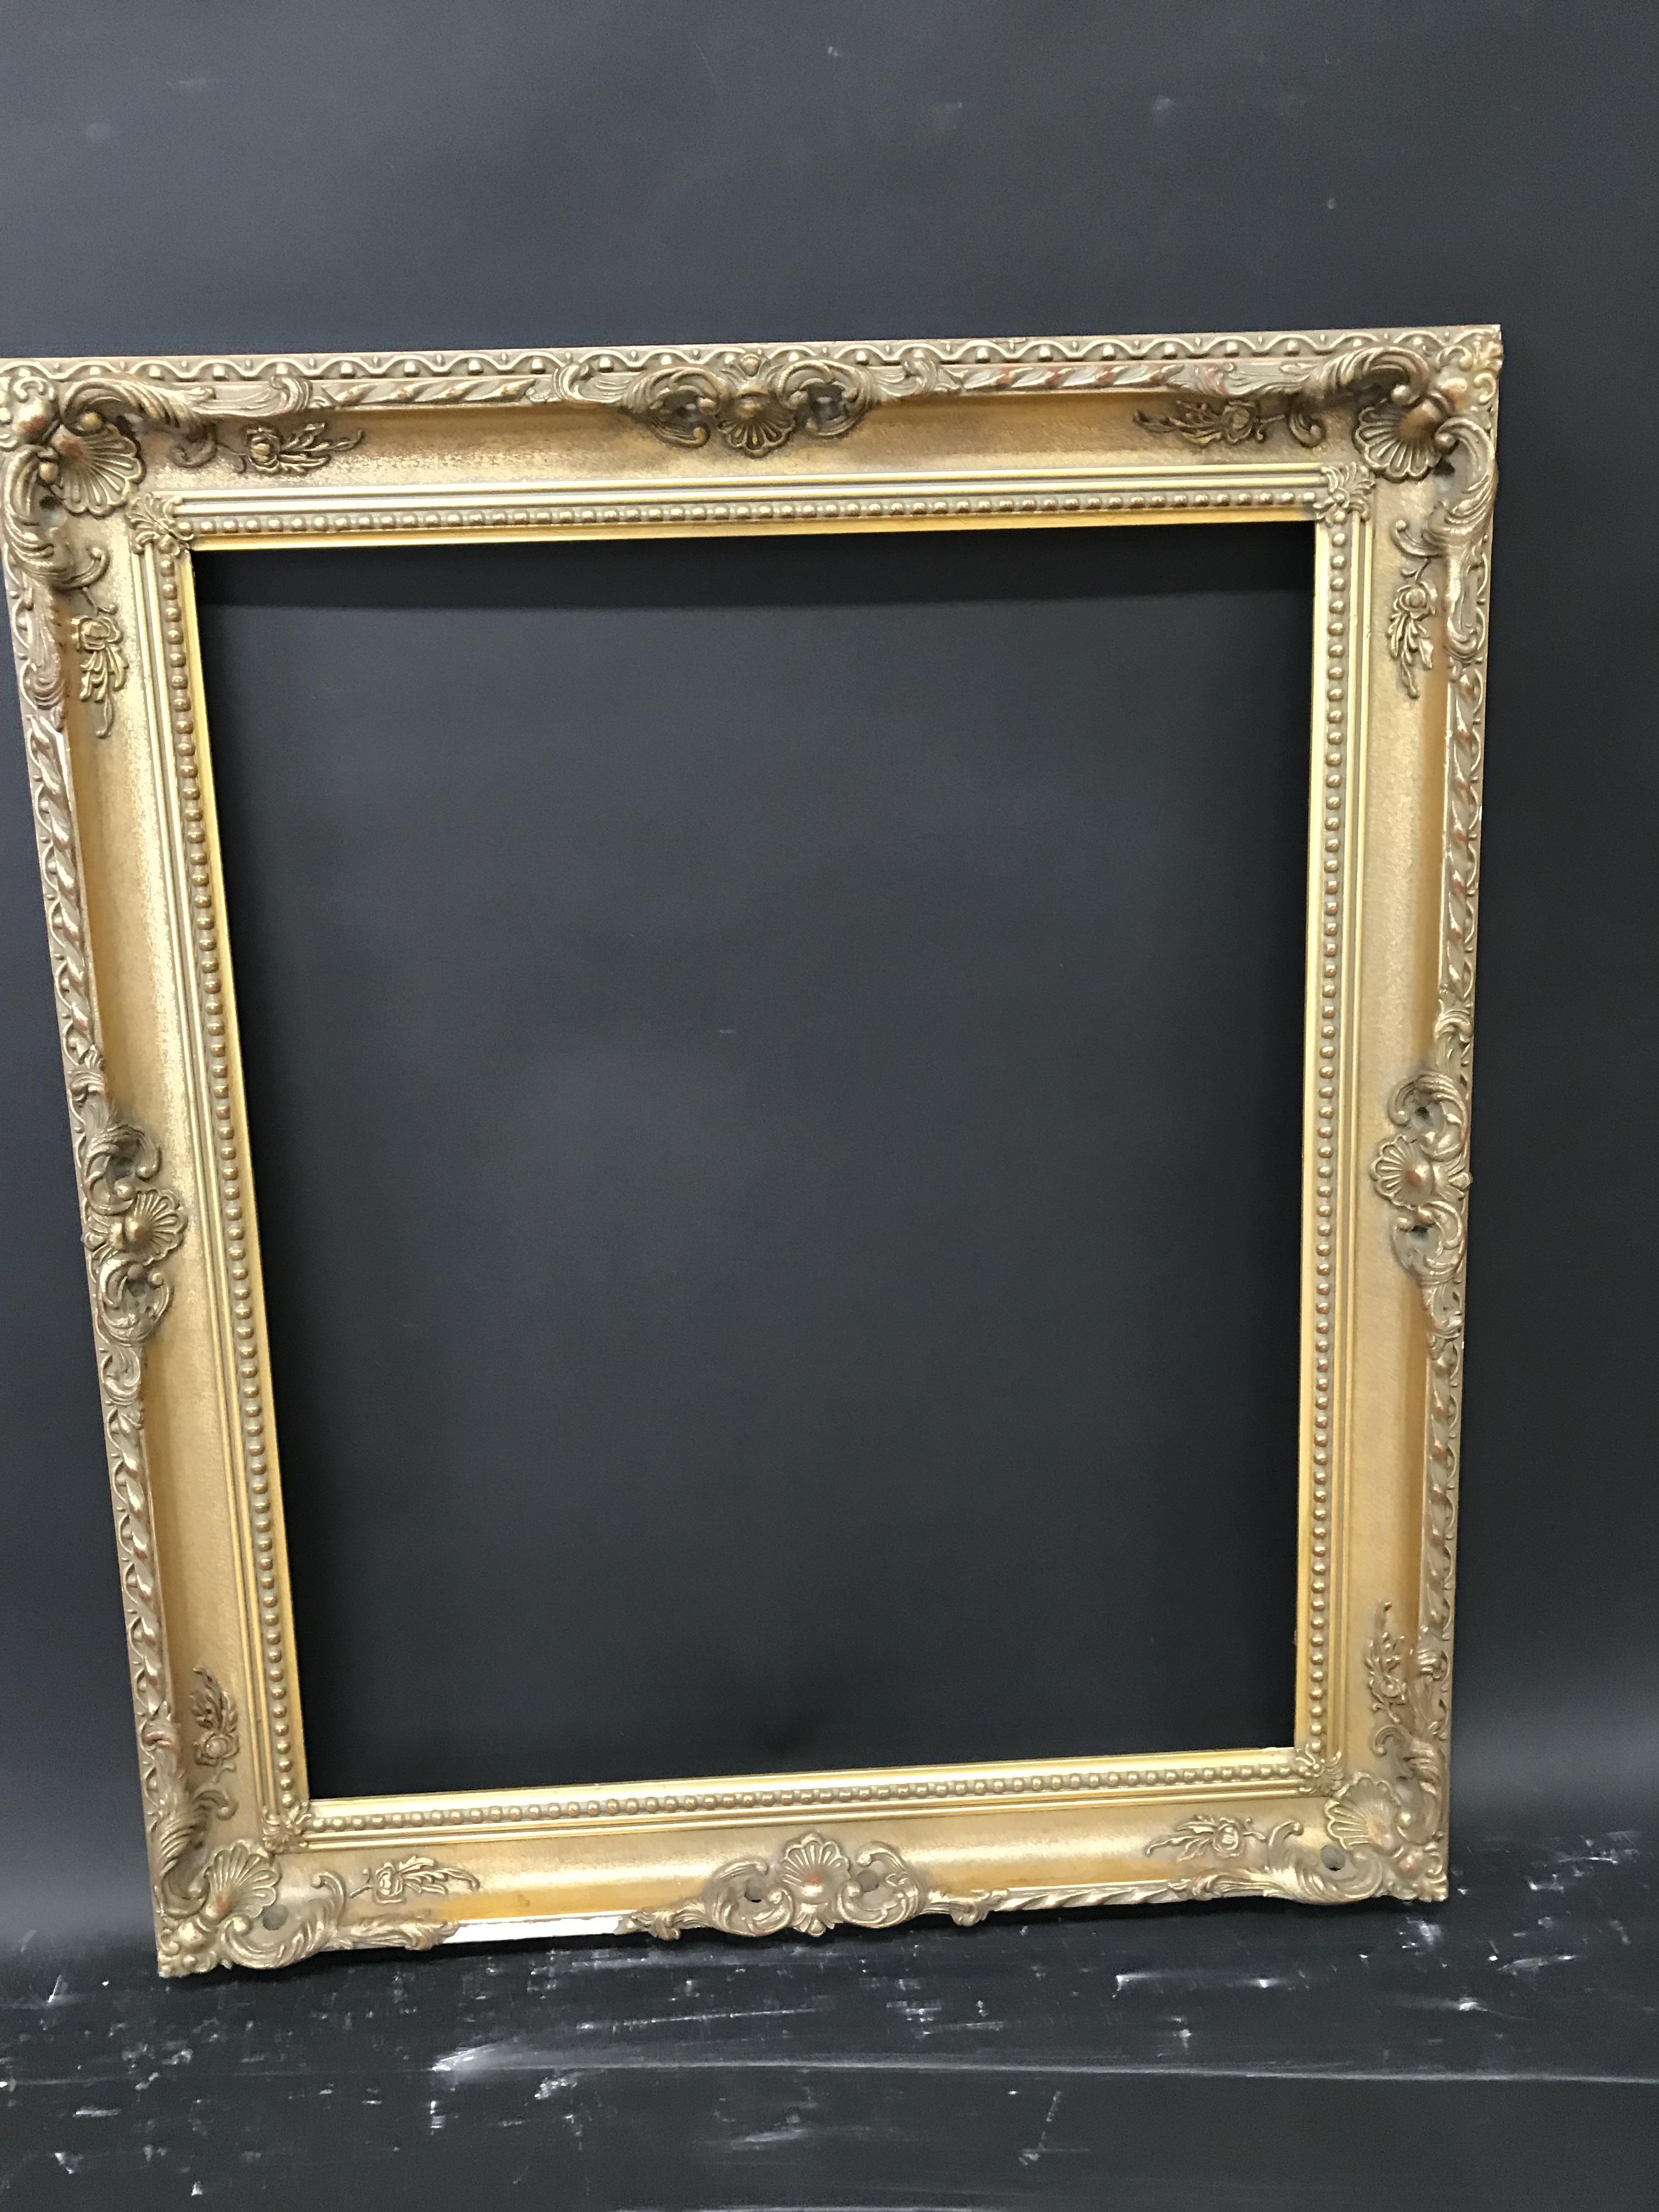 20th Century English School. A Gilt Composition Frame, with Swept and Pierced Centres and Corners, - Image 2 of 3